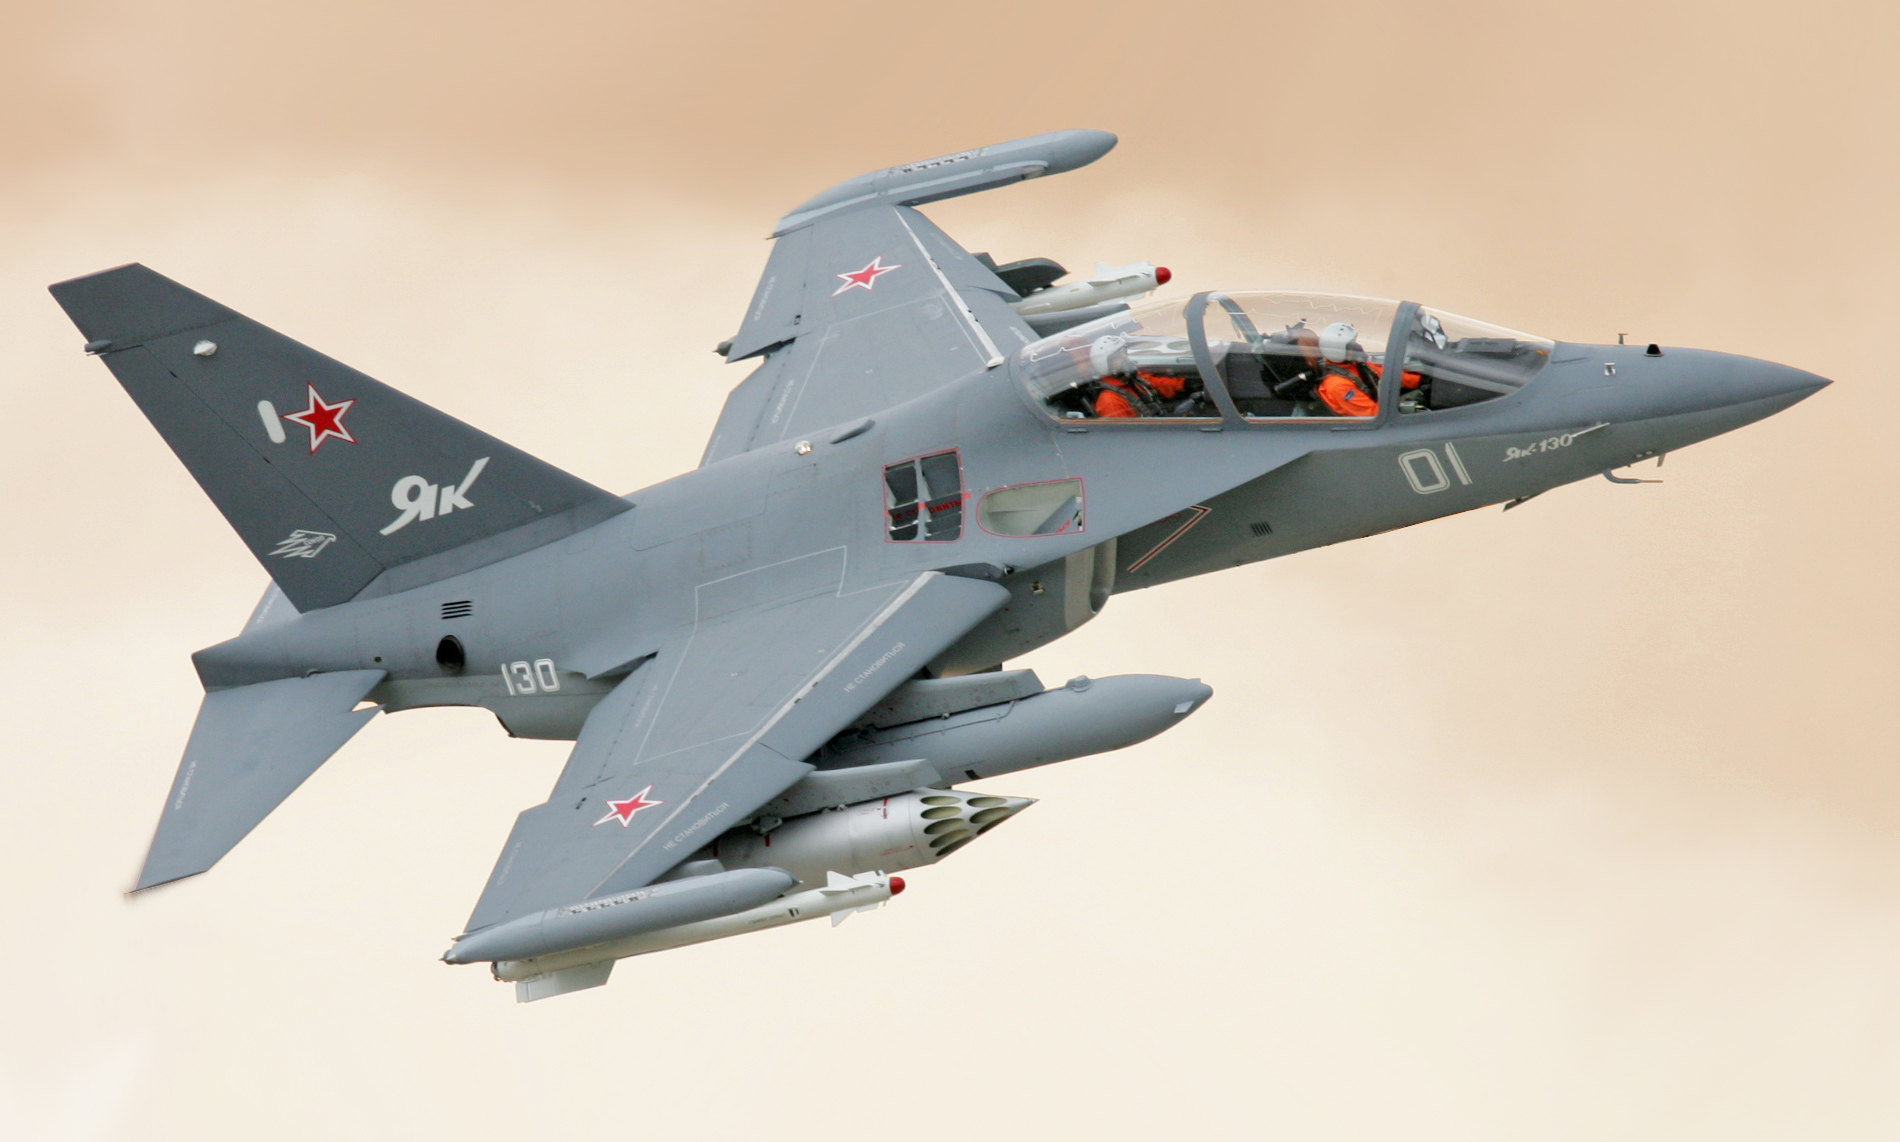 Image about Yak-130 To Be Reconfigured As Fighter-Bomber For Export